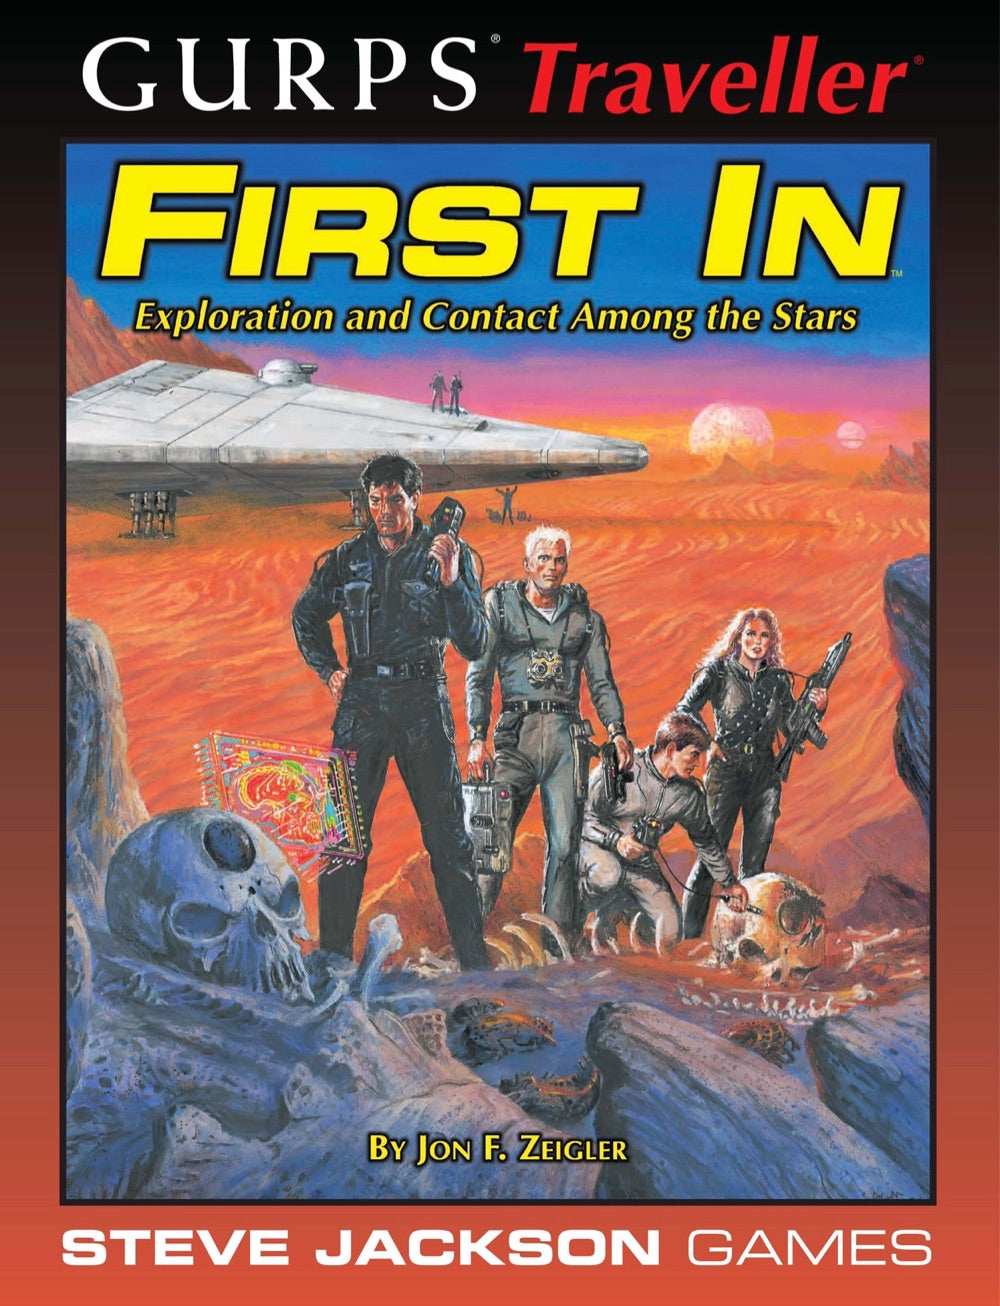 GURPS Traveller Classic: First In